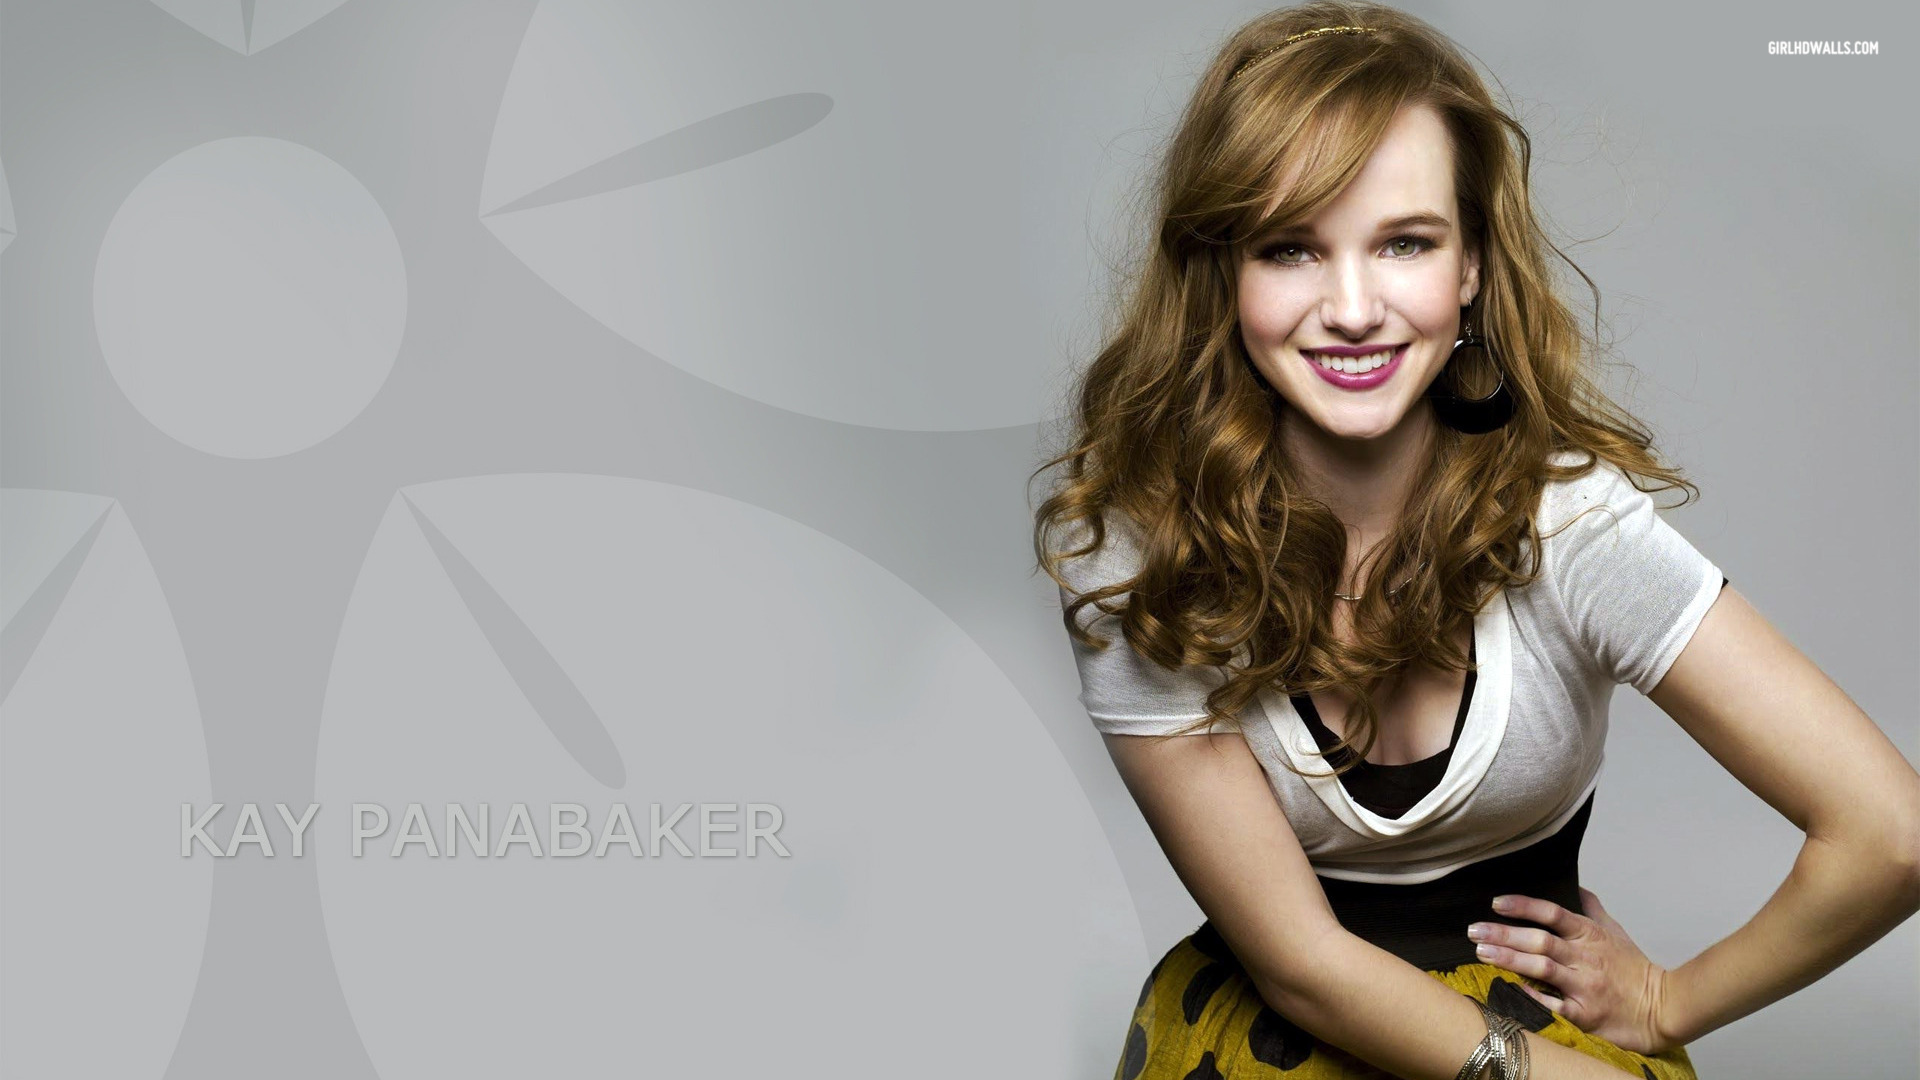 Photo Collection Danielle Panabaker Wallpaper Forwallpapercom - Danielle Panabaker Wallpaper Hd , HD Wallpaper & Backgrounds